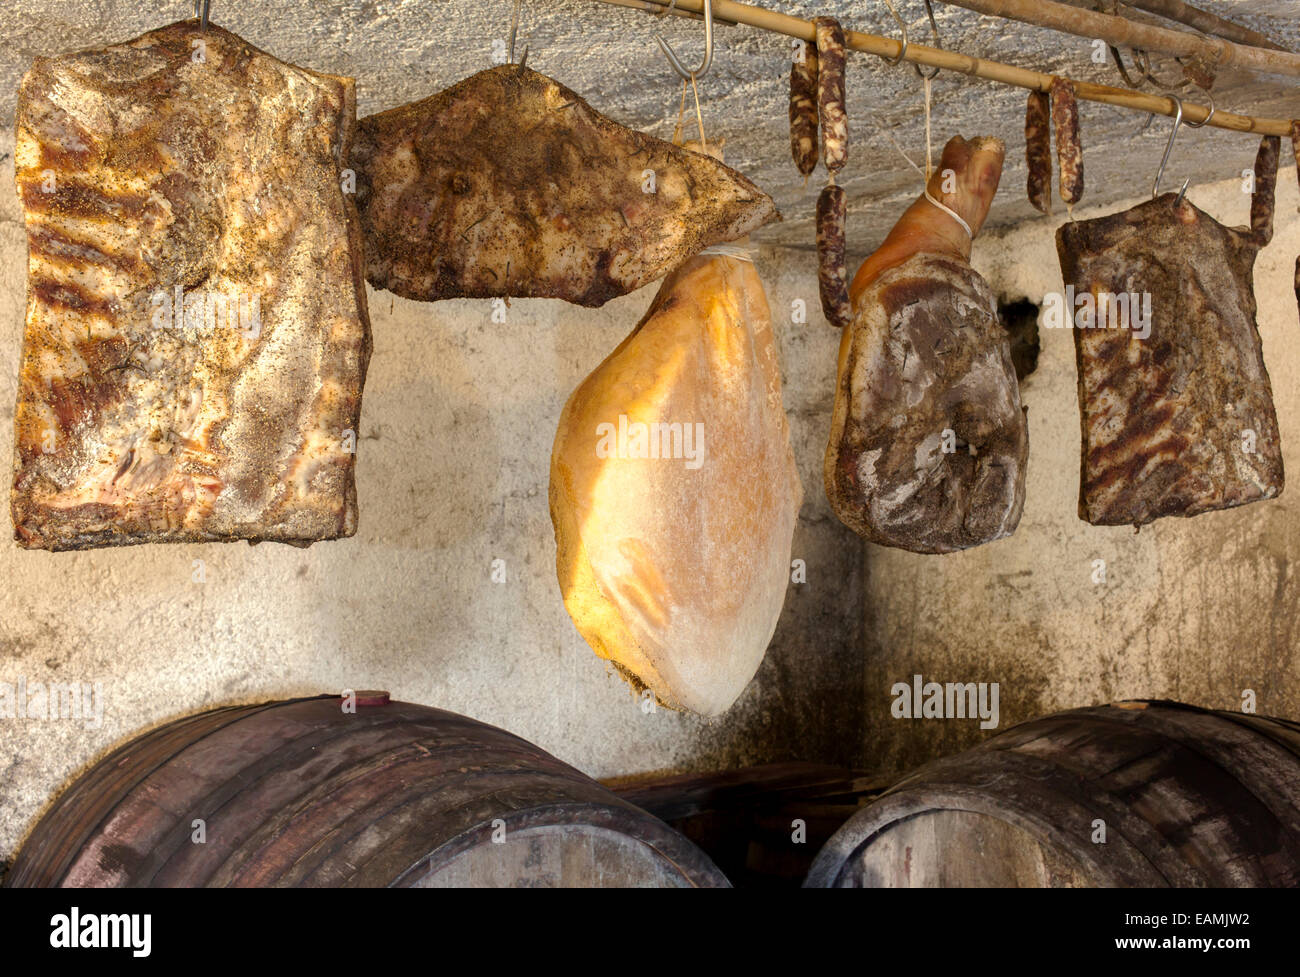 Interior of very old wine cellar with dried meat delicatessen Stock Photo